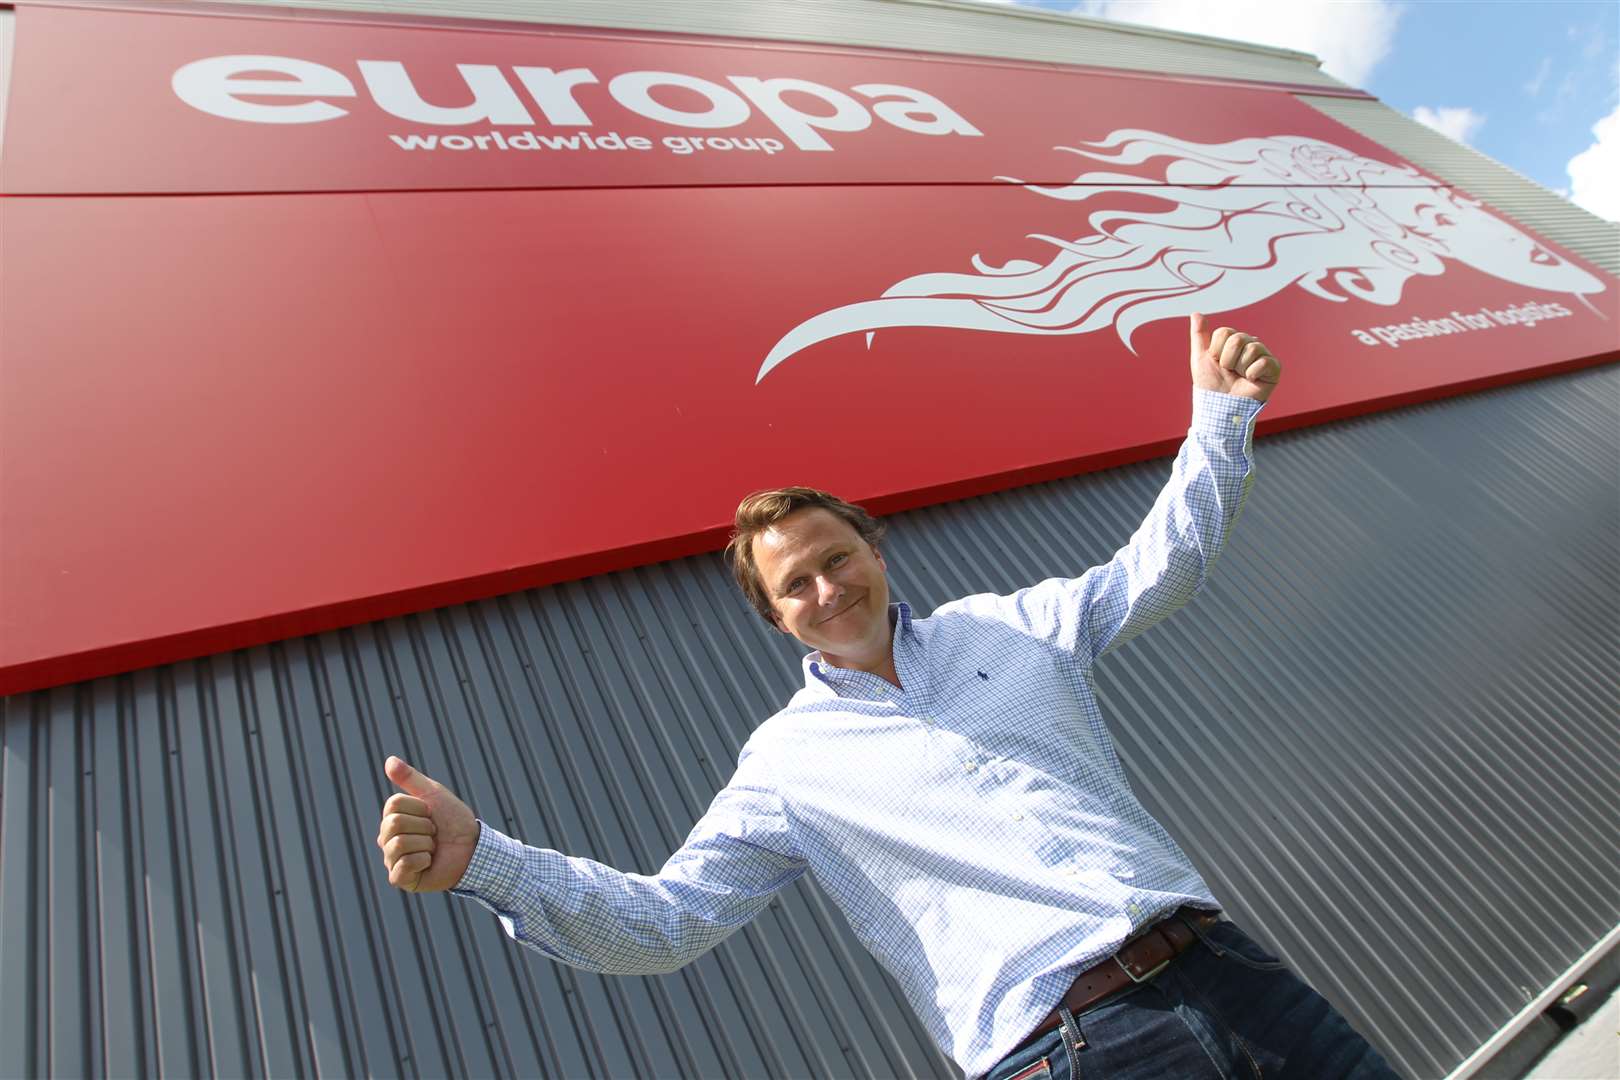 Europa Worldwide owner and managing director Andrew Baxter